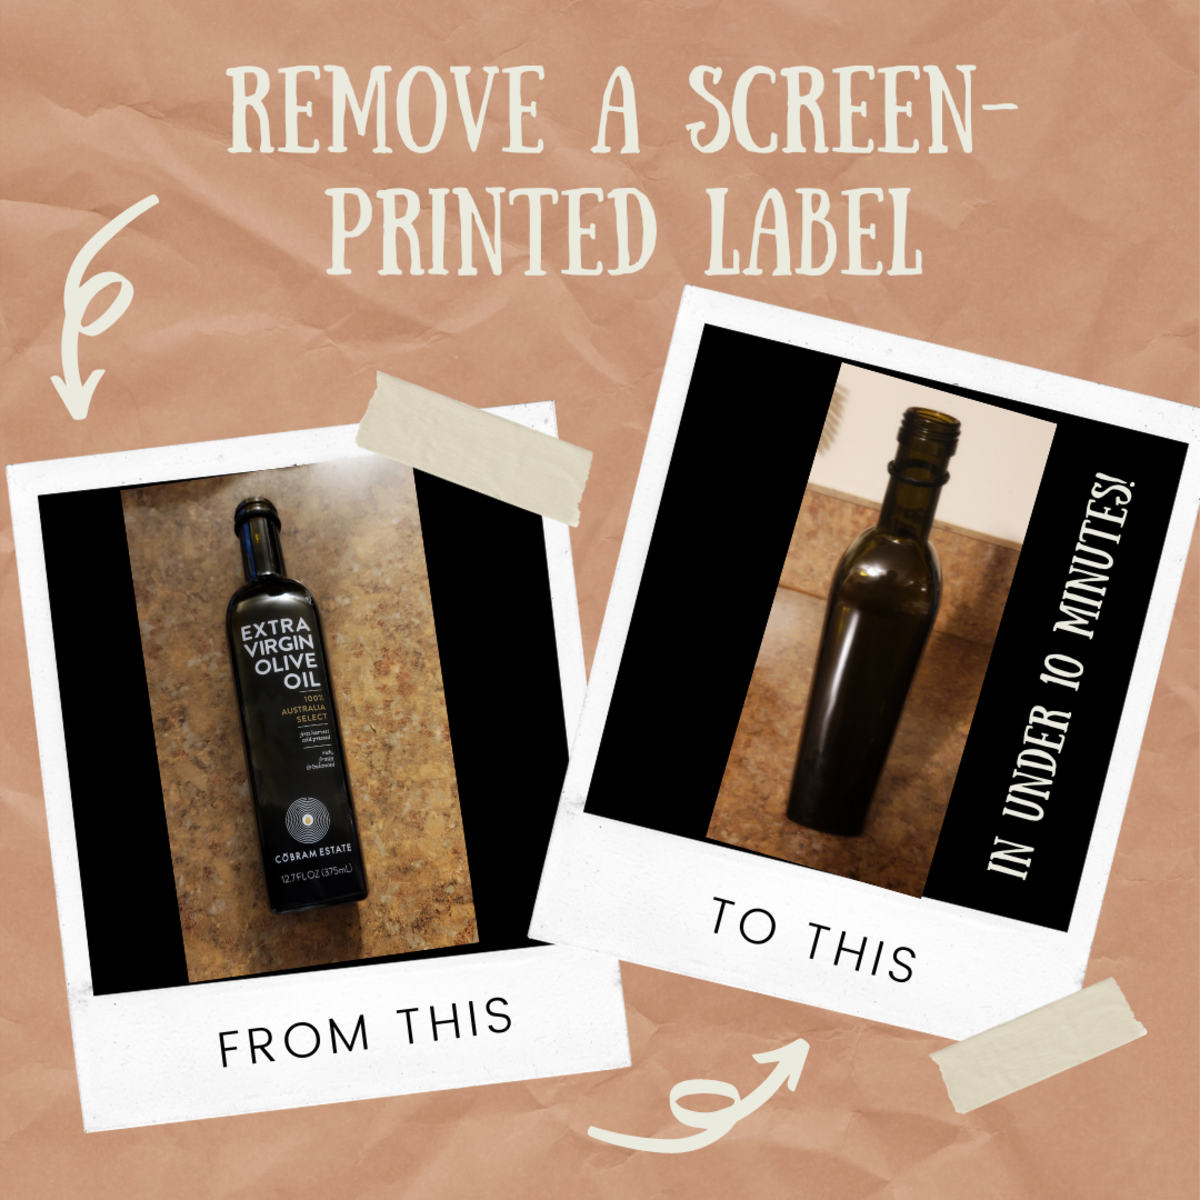 screen-printed-label-removal